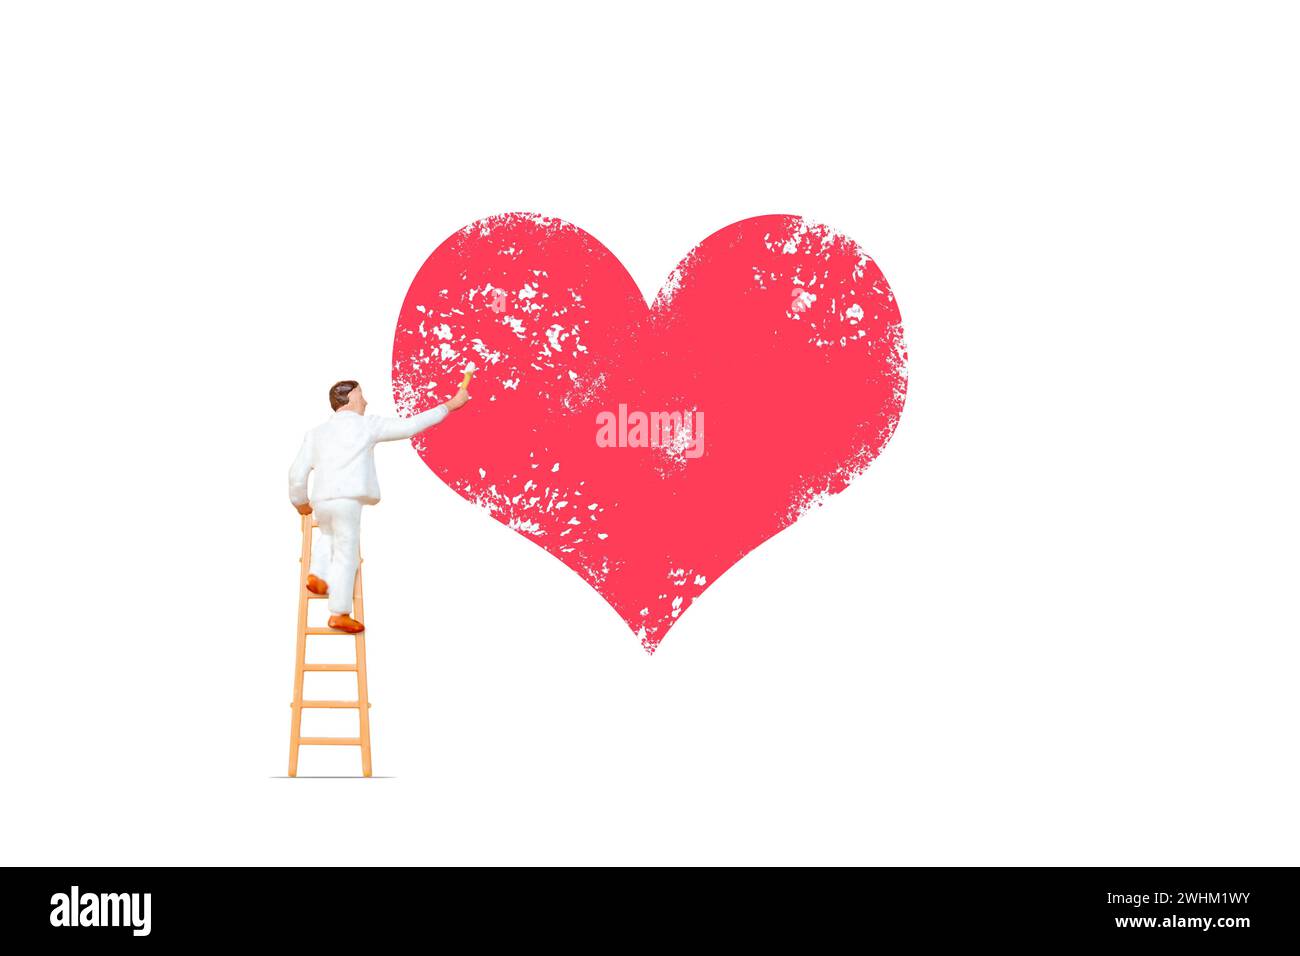 Miniature people, Artist holding paintbrush and painting with red heart shape on white background Stock Photo